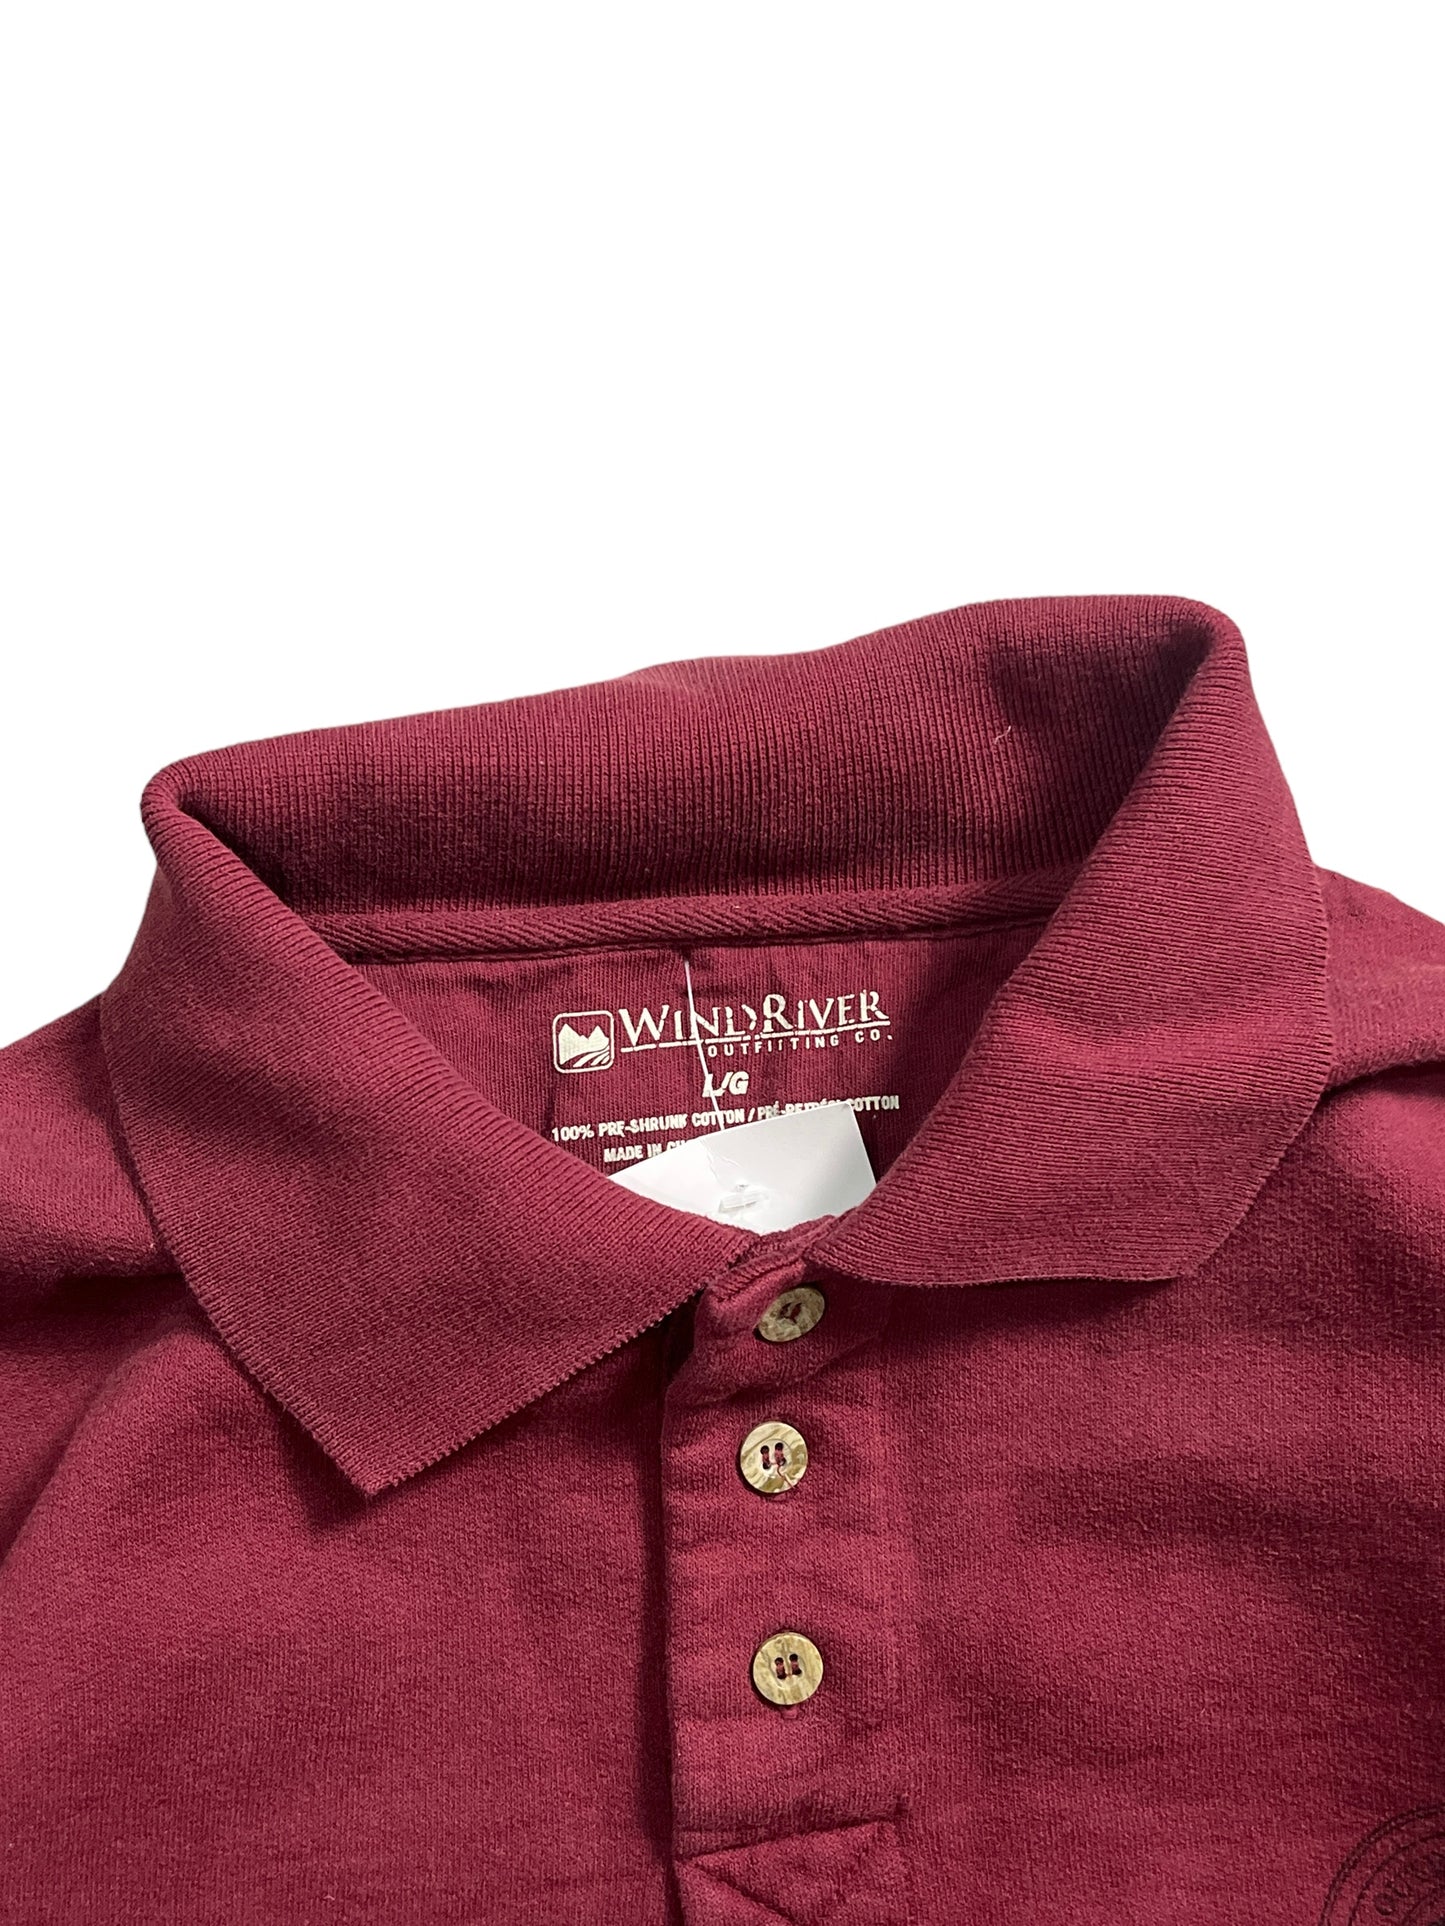 Vintage Windriver Button Up Sweater